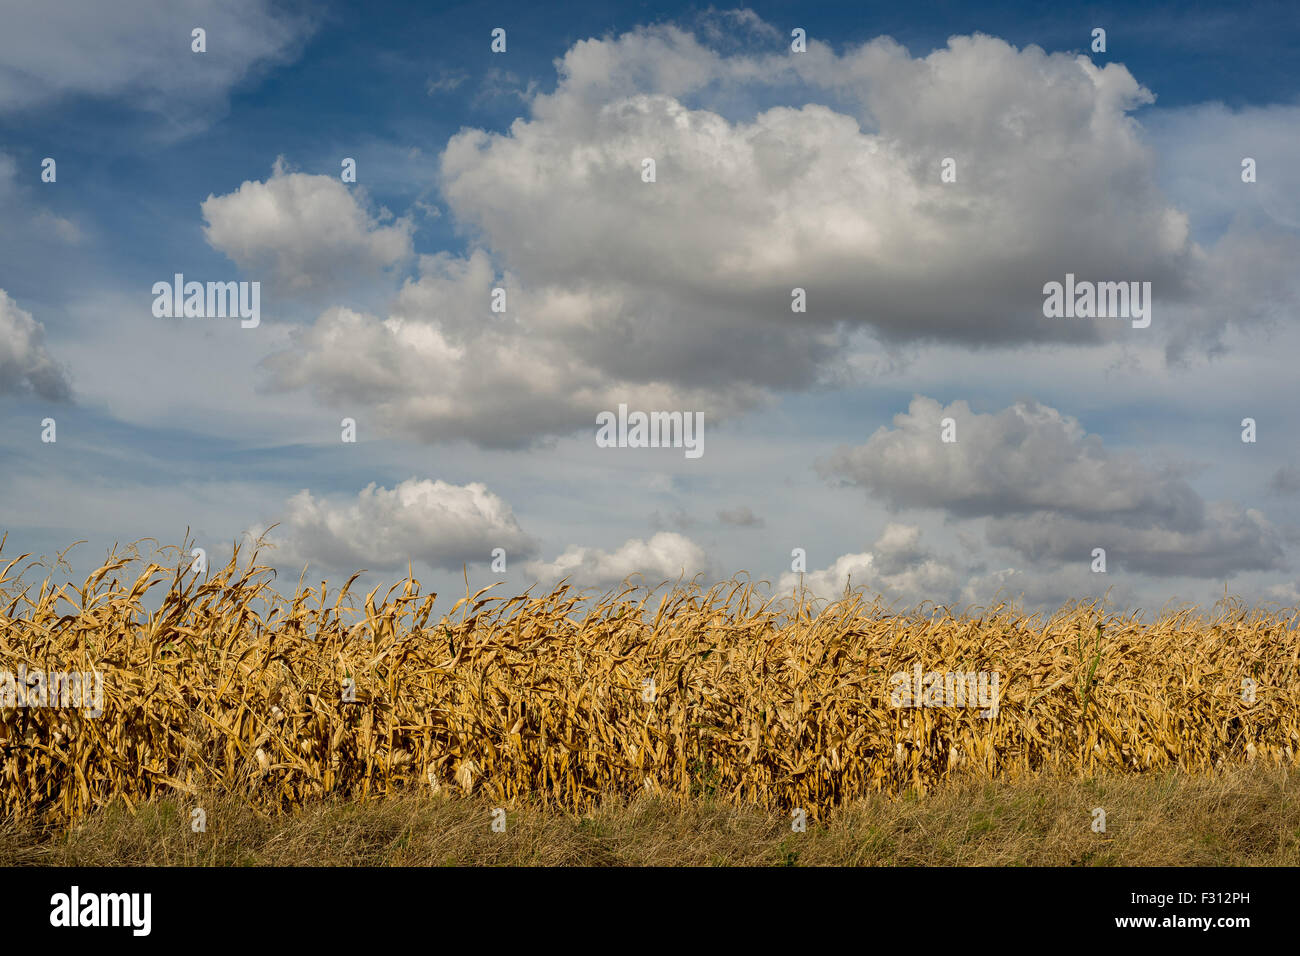 White cumulonimbus clouds in the blue sky over dry corn fields Lower Silesia Poland Stock Photo